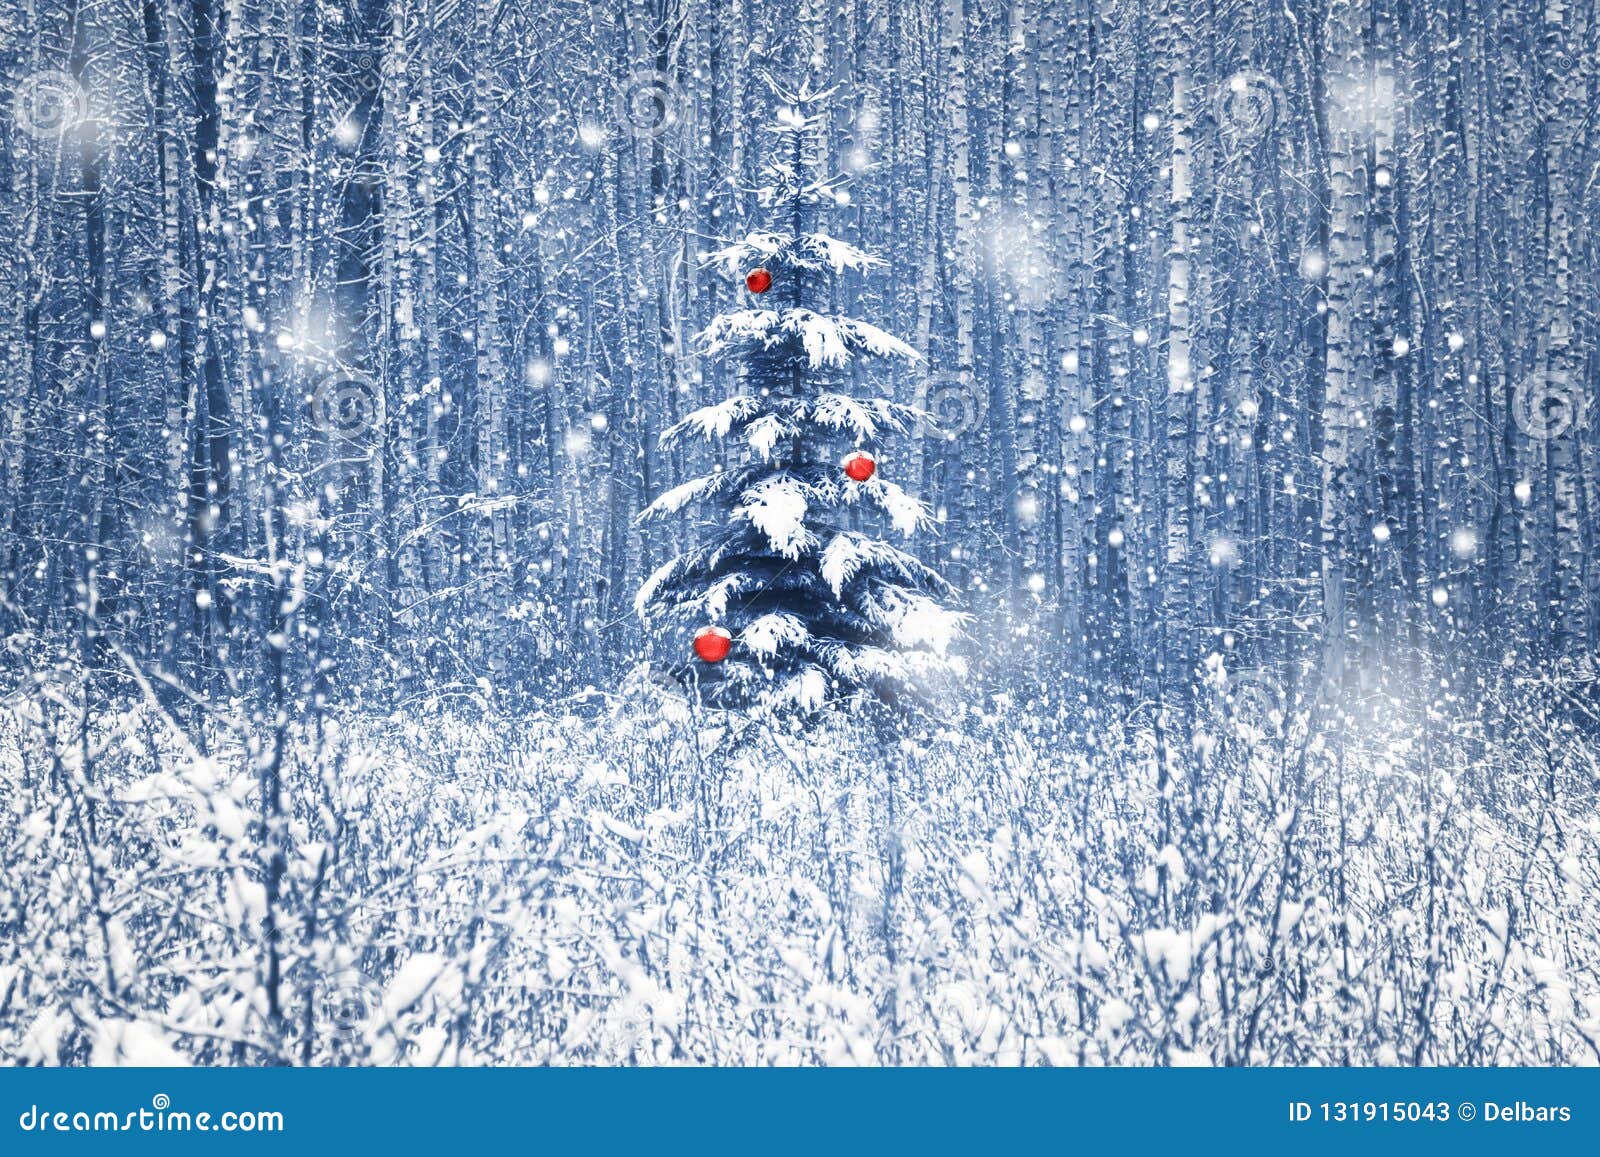 christmas fir tree with red christmas decorations in the winter snowy forest. blue toning.